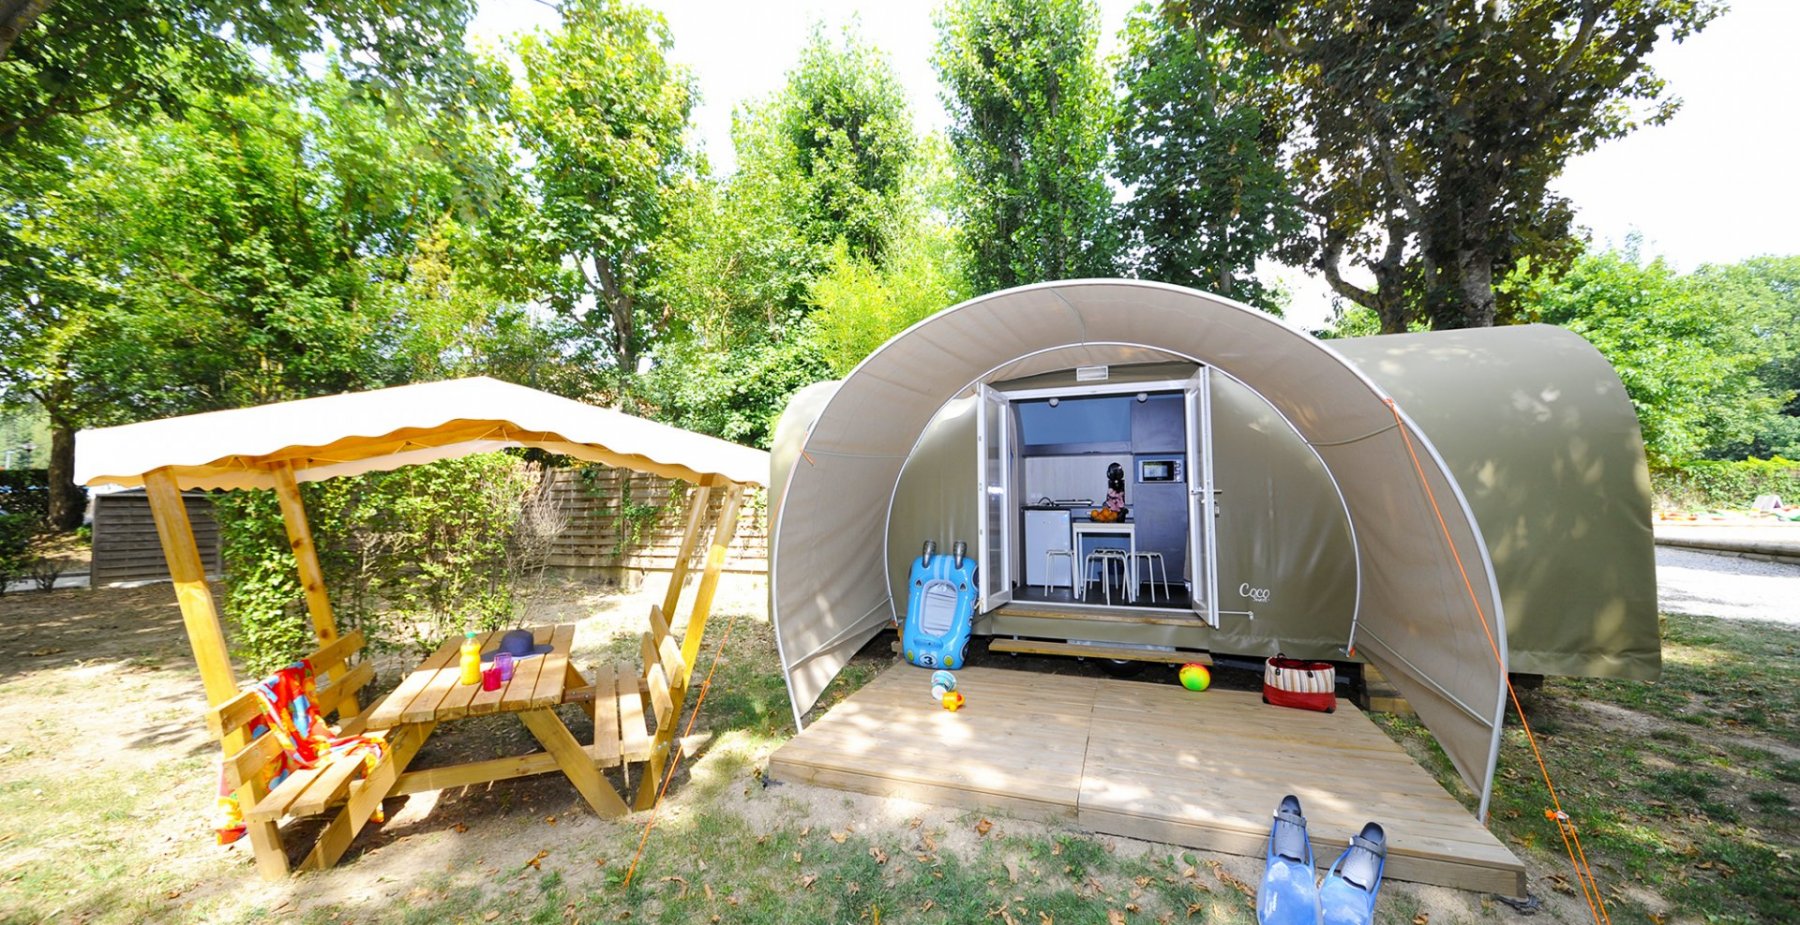 Coco Sweet rental at the Viaduc campsite in Aveyron